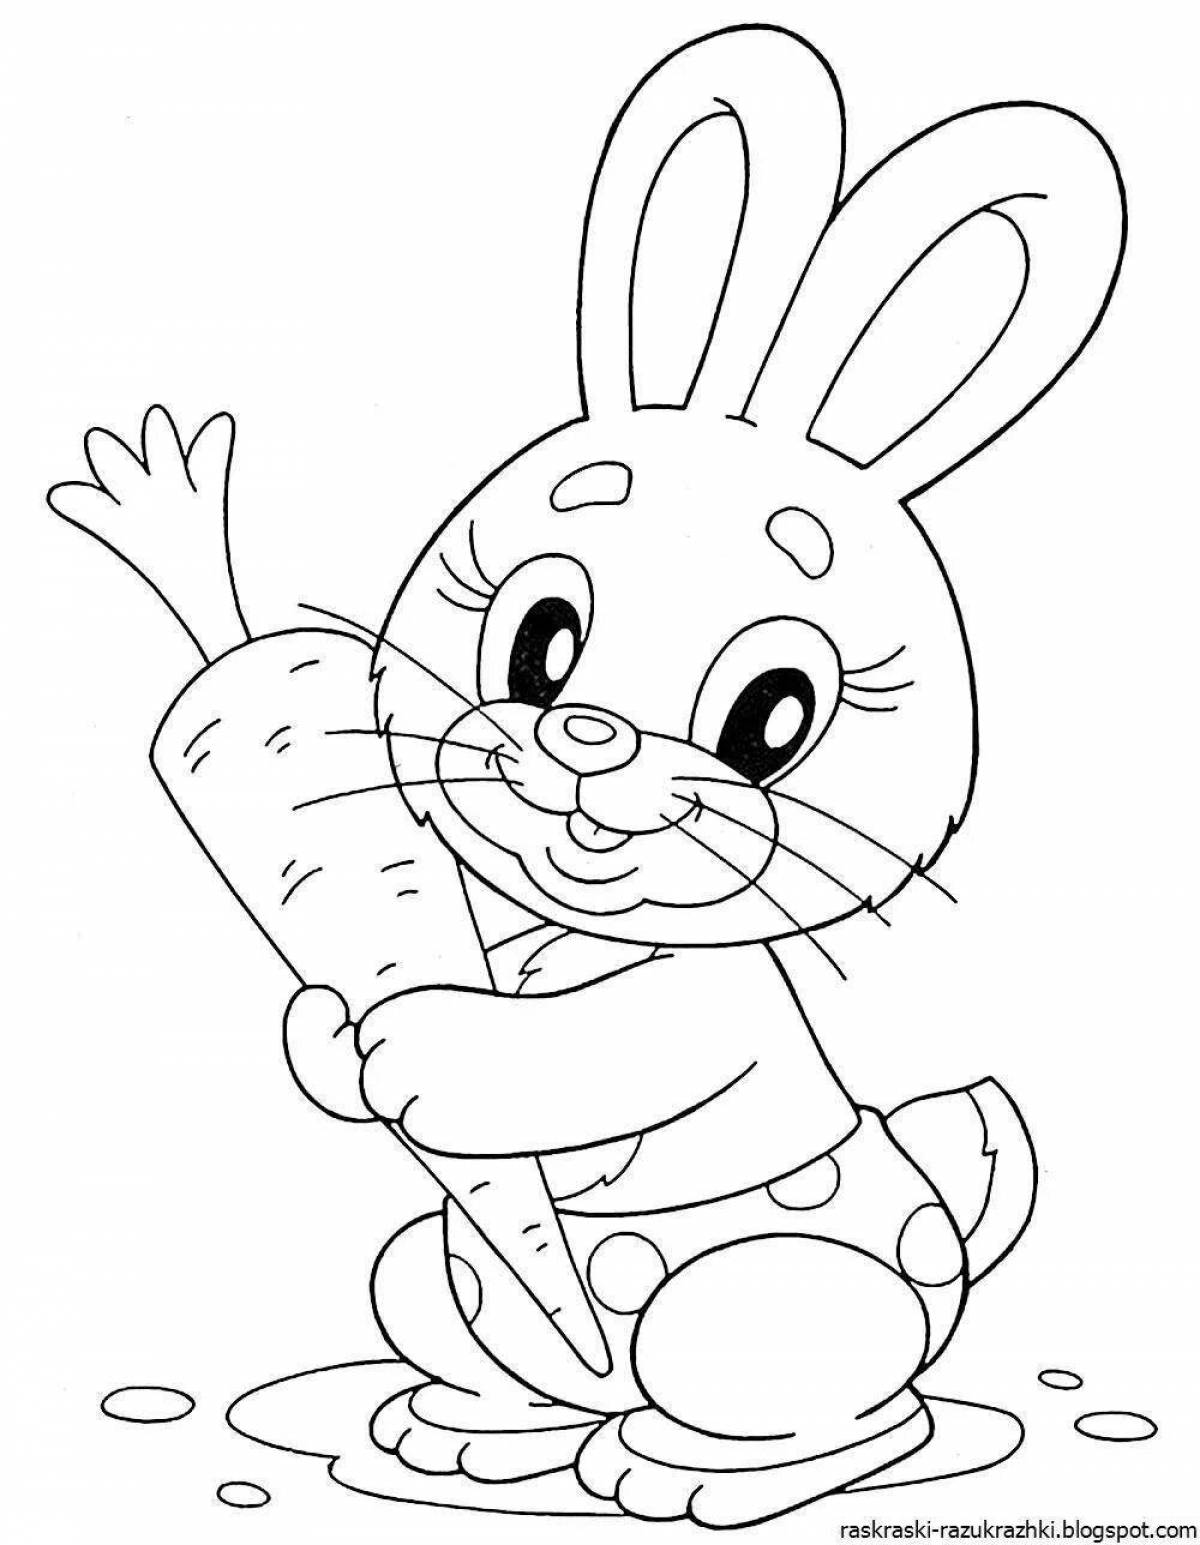 Nice rabbit coloring for kids